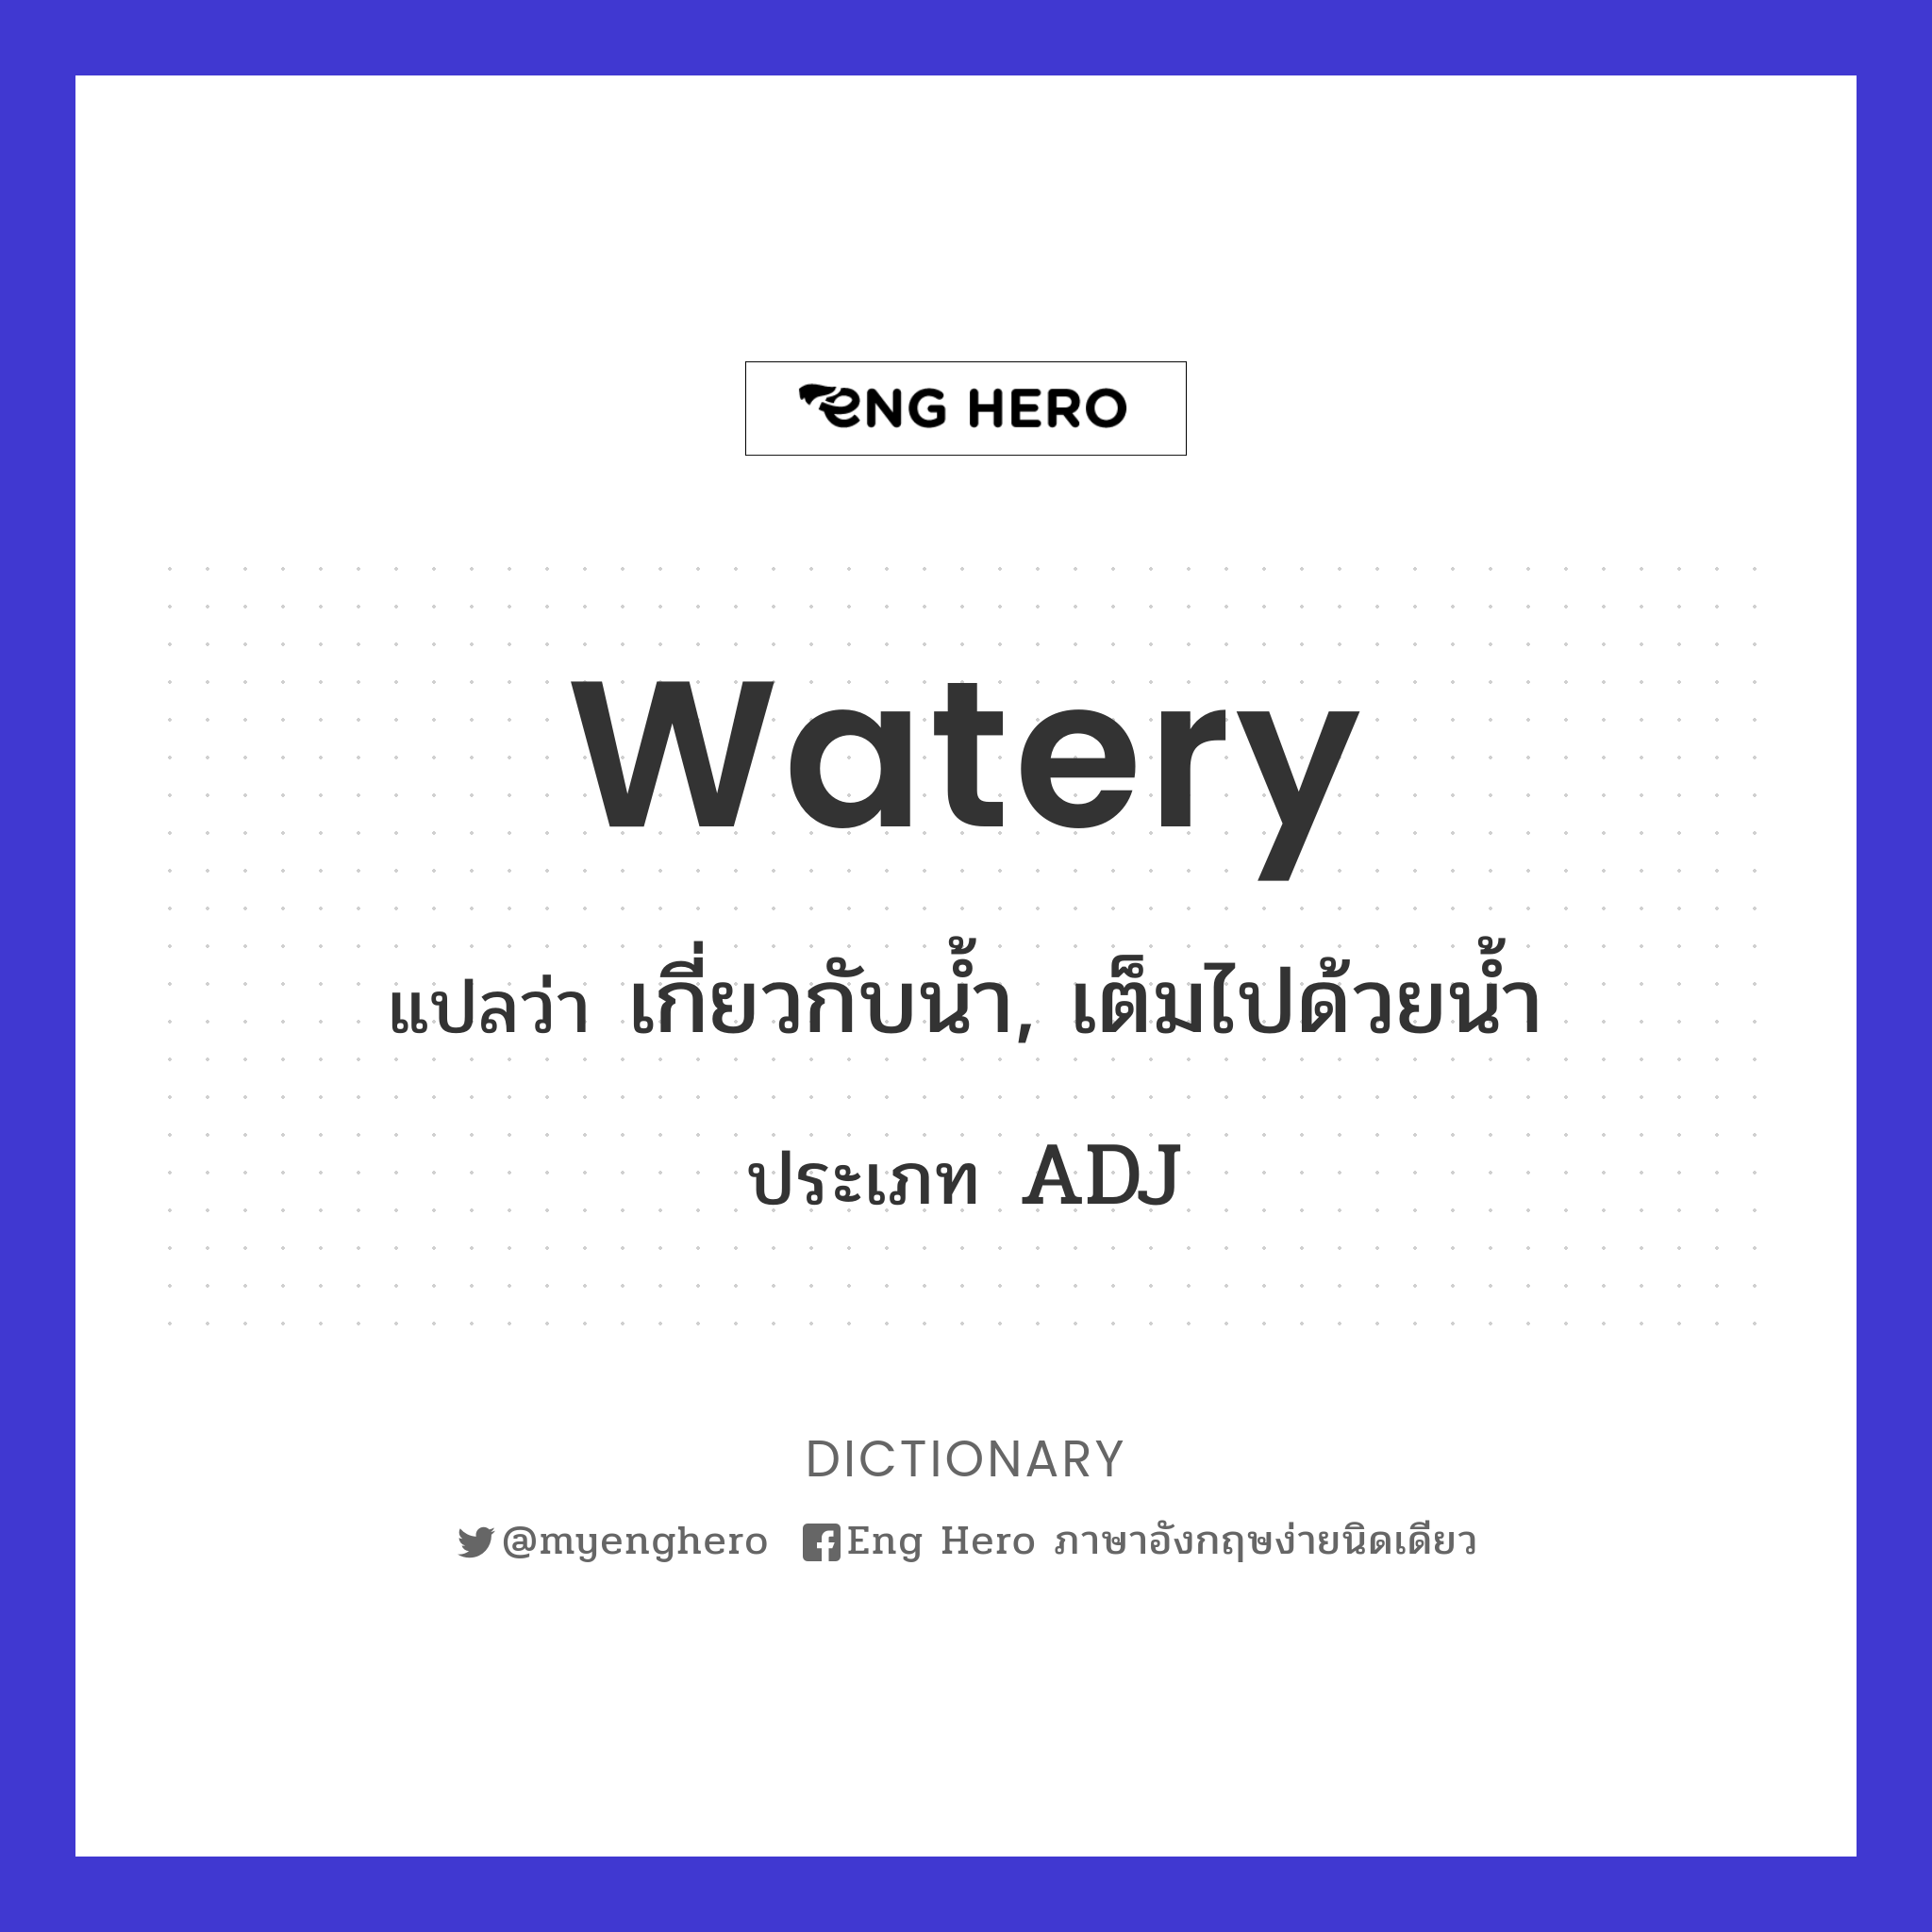 watery